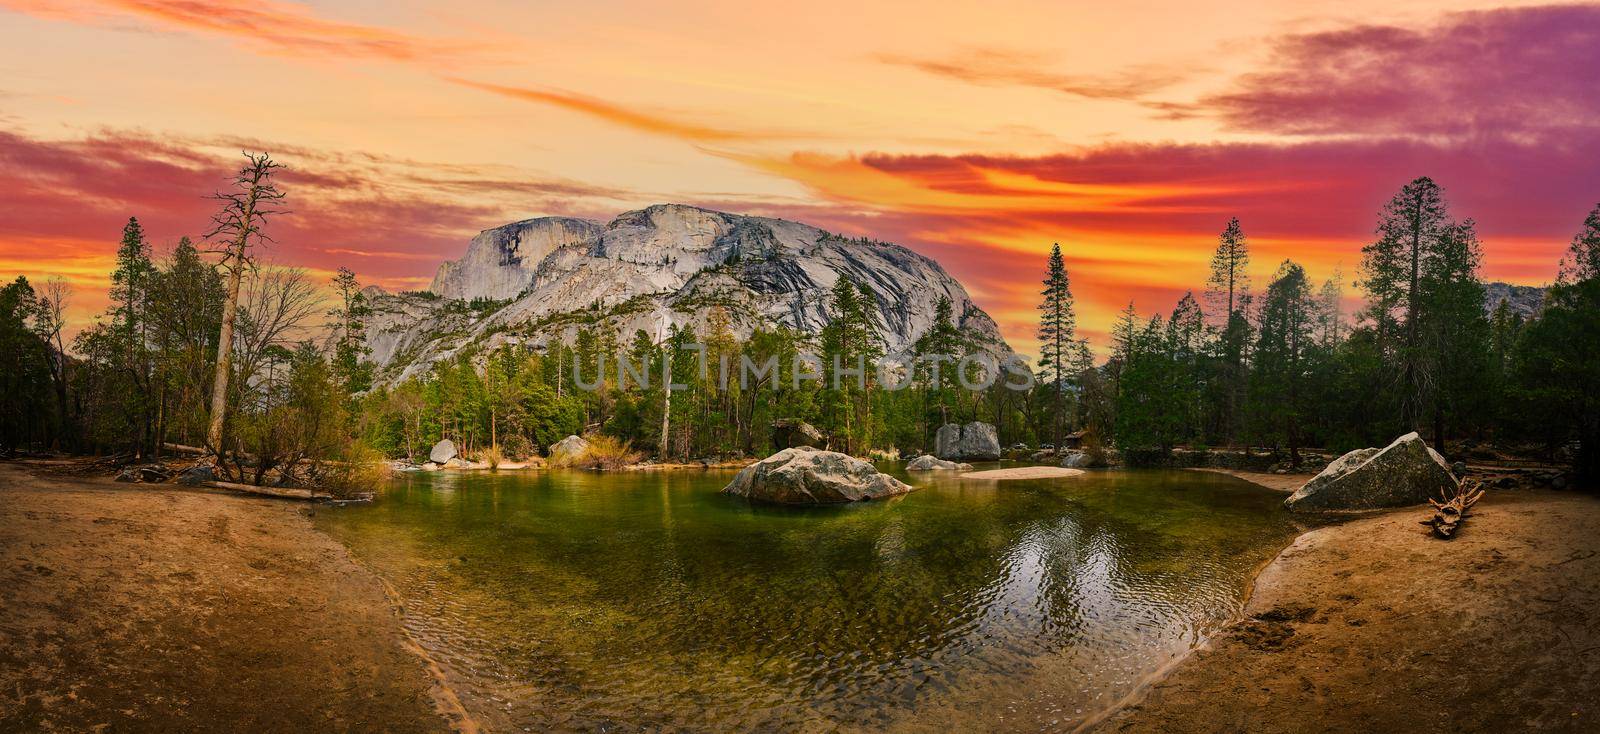 Panorama of iconic Yosemite Half Dome from Mirror Lake at dawn by njproductions